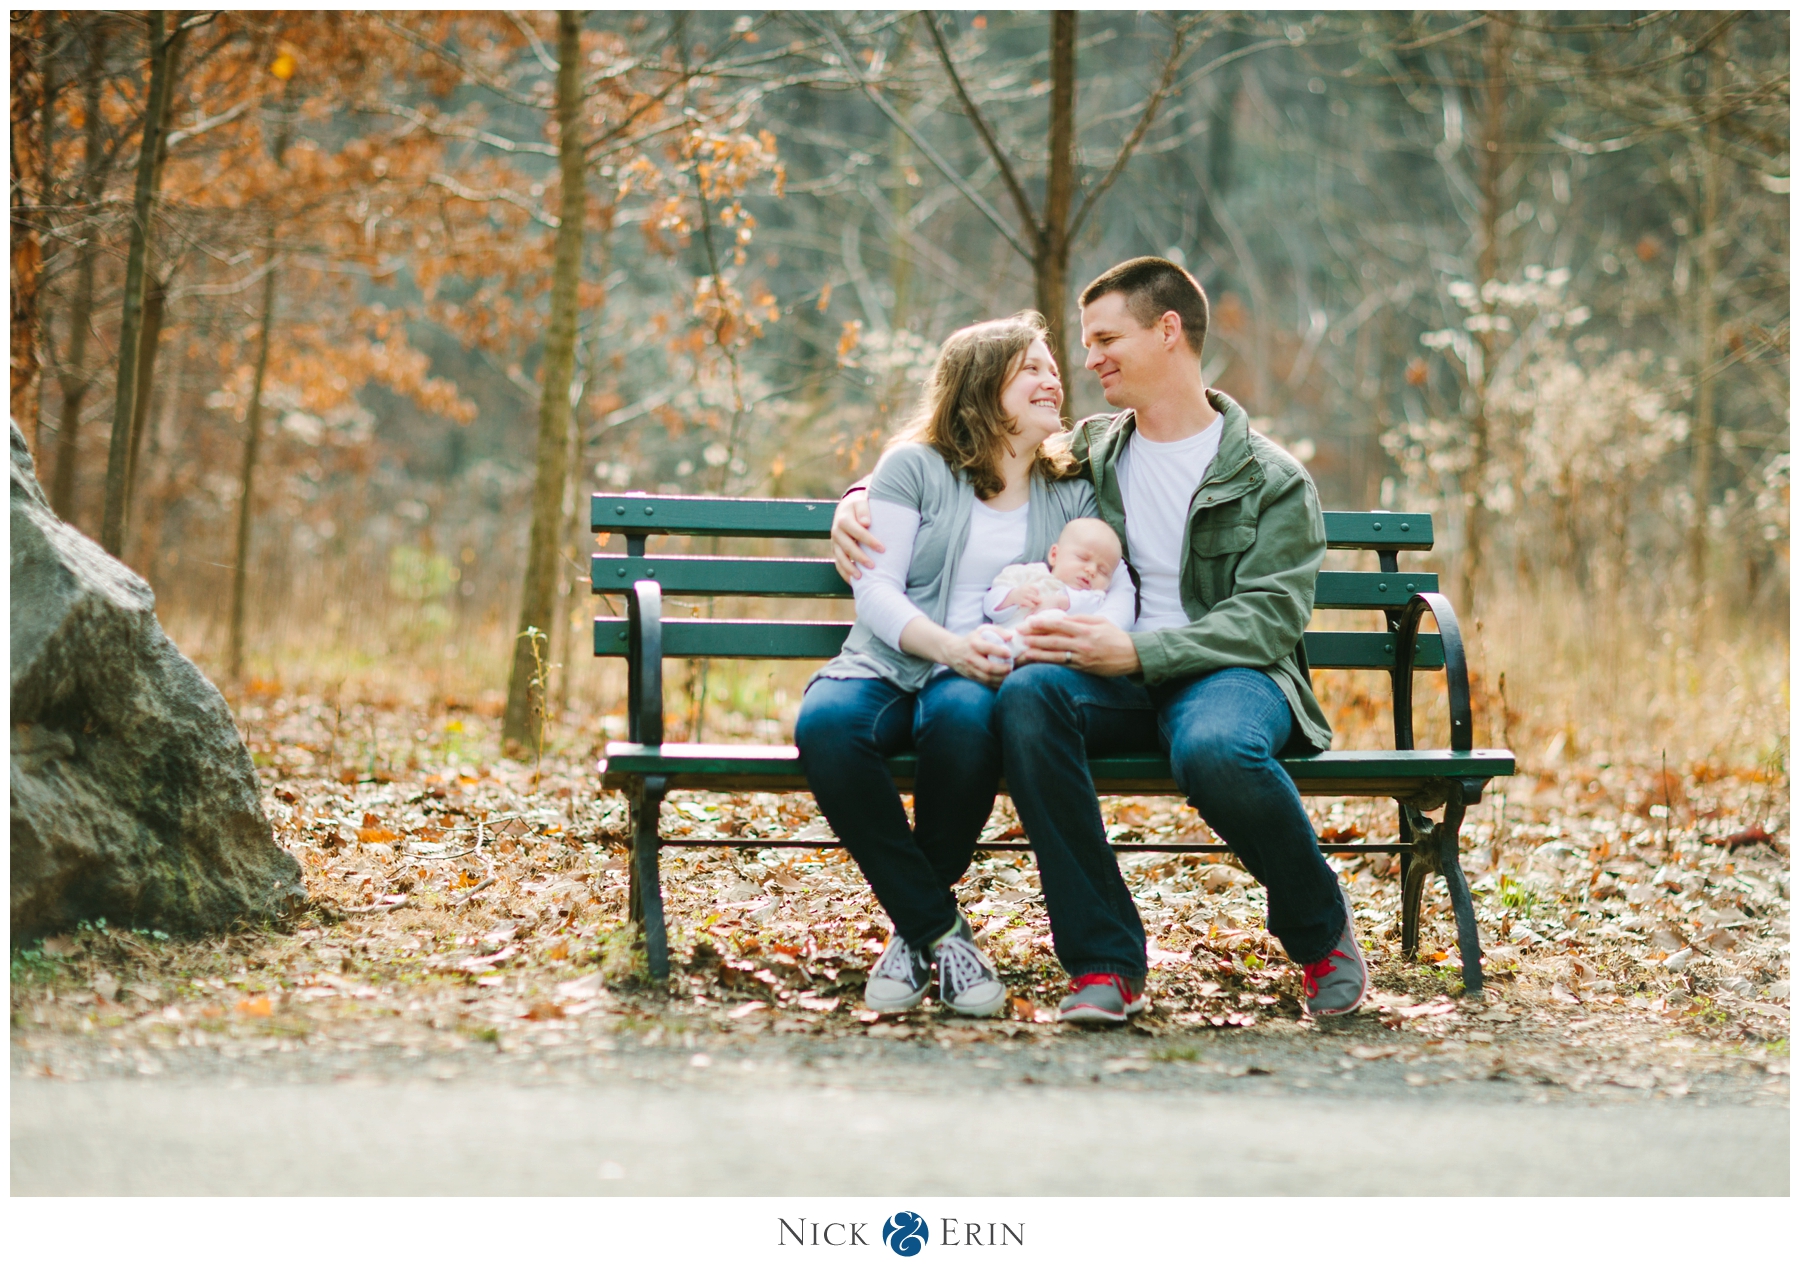 Donner_Photography_Woods Family Portraits_0009